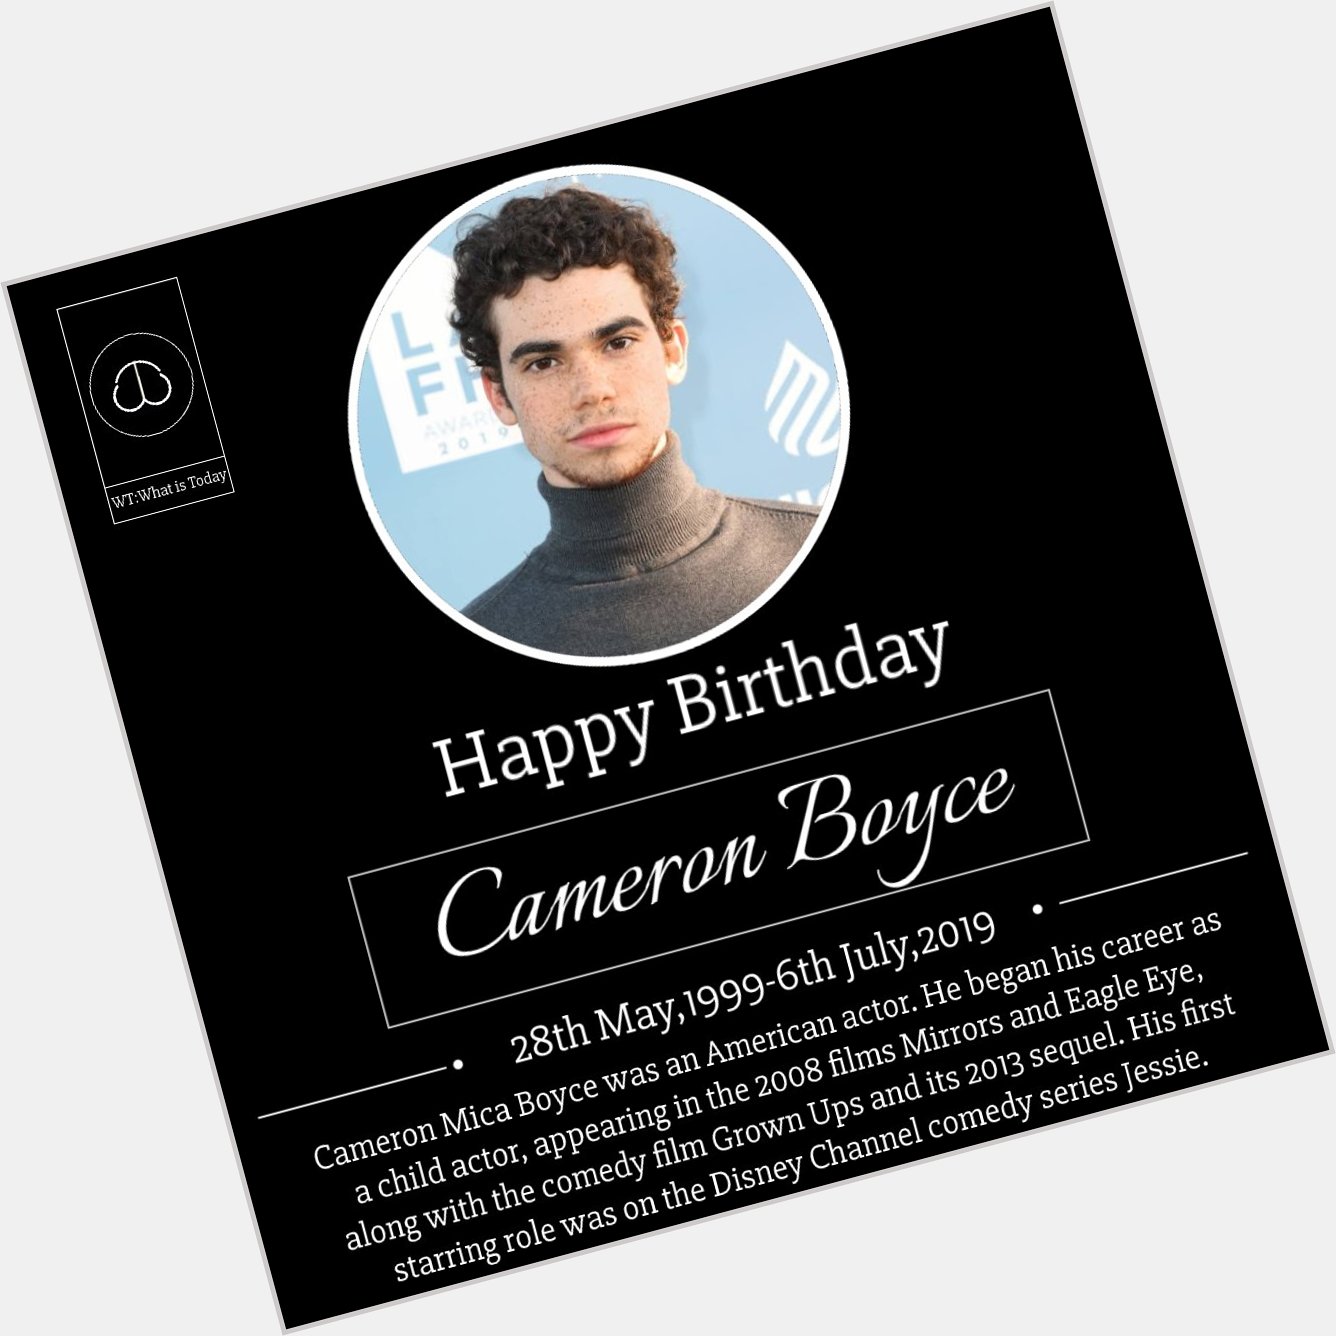 Rest in Peace Cameron Boyce.Happy Heavenly Birthday to you.  